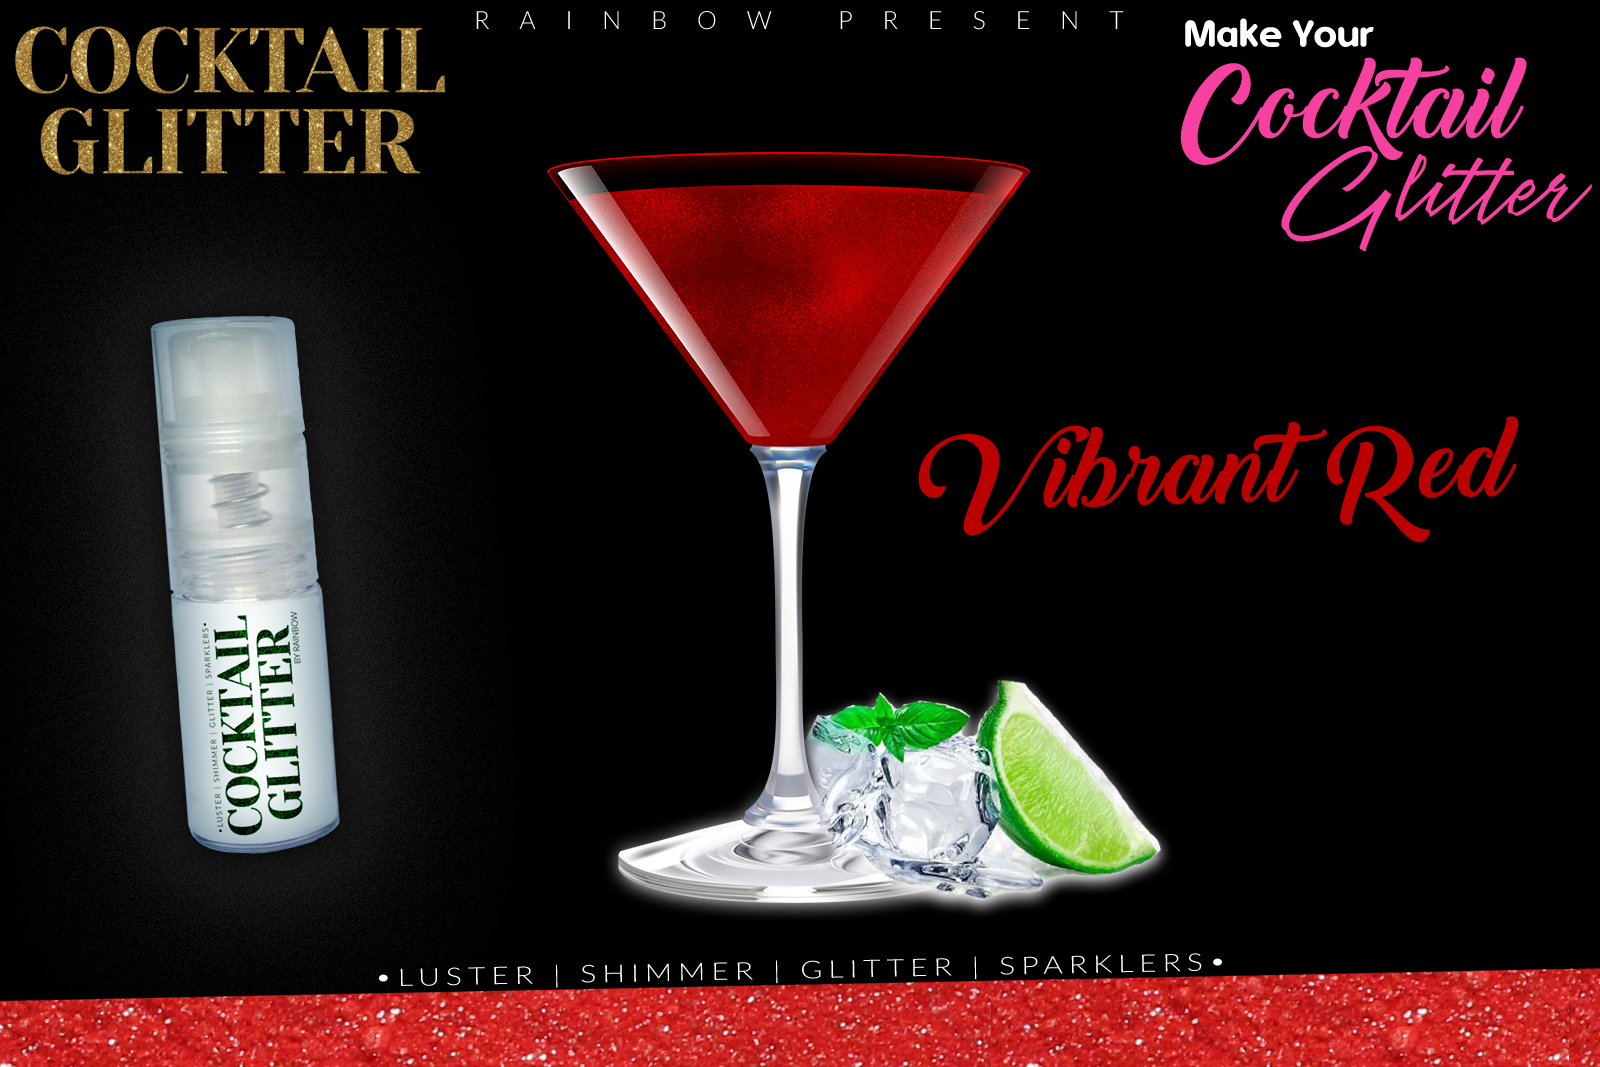 Glitzy Cocktail Glitter and Sparkling Effect | Edible | Vibrant Red